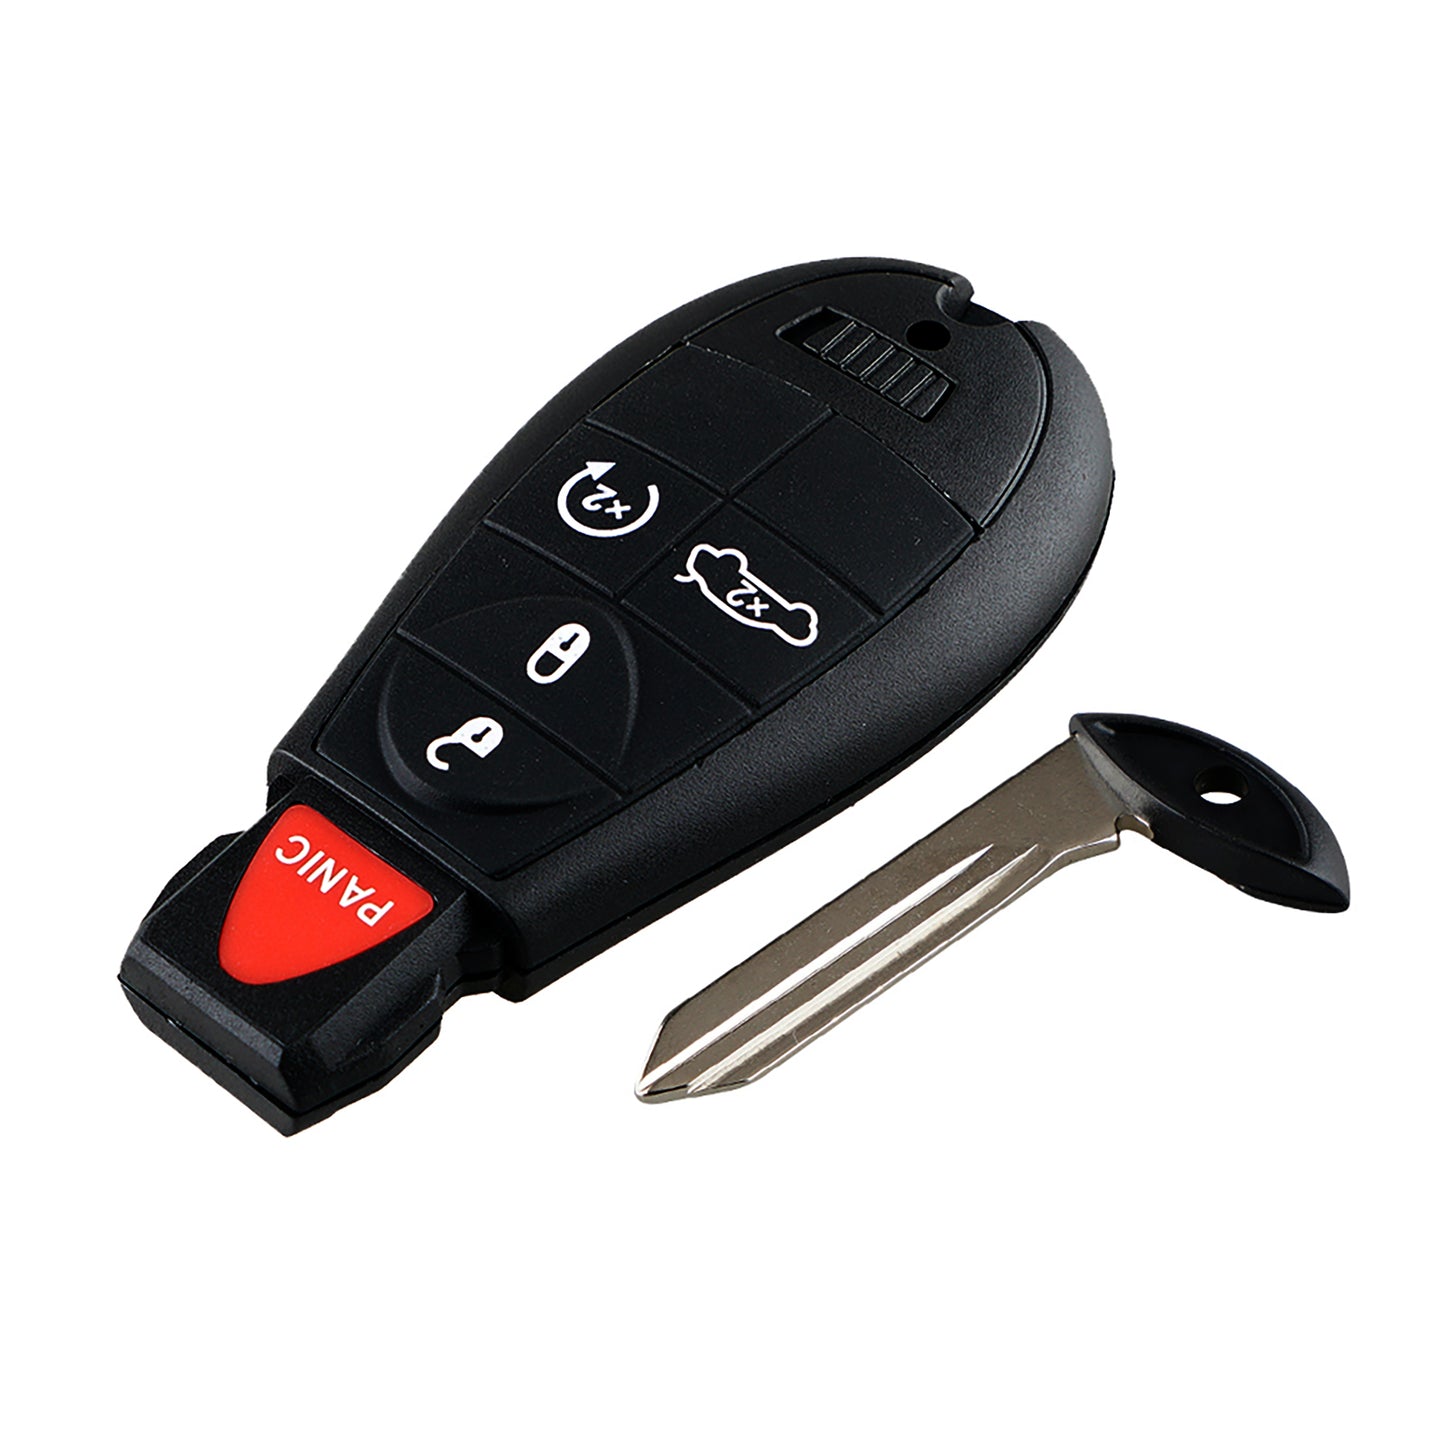 5 Buttons 433MHz Keyless Entry Fob Remote Car Key For2008-2014 Dodge Charger Magnum Challenger 2008-2013 Jeep Grand Cherokee 2008-2011 Chrysler 300 FCC ID: M3N5WY783X IYZ-C01C SKU : J025